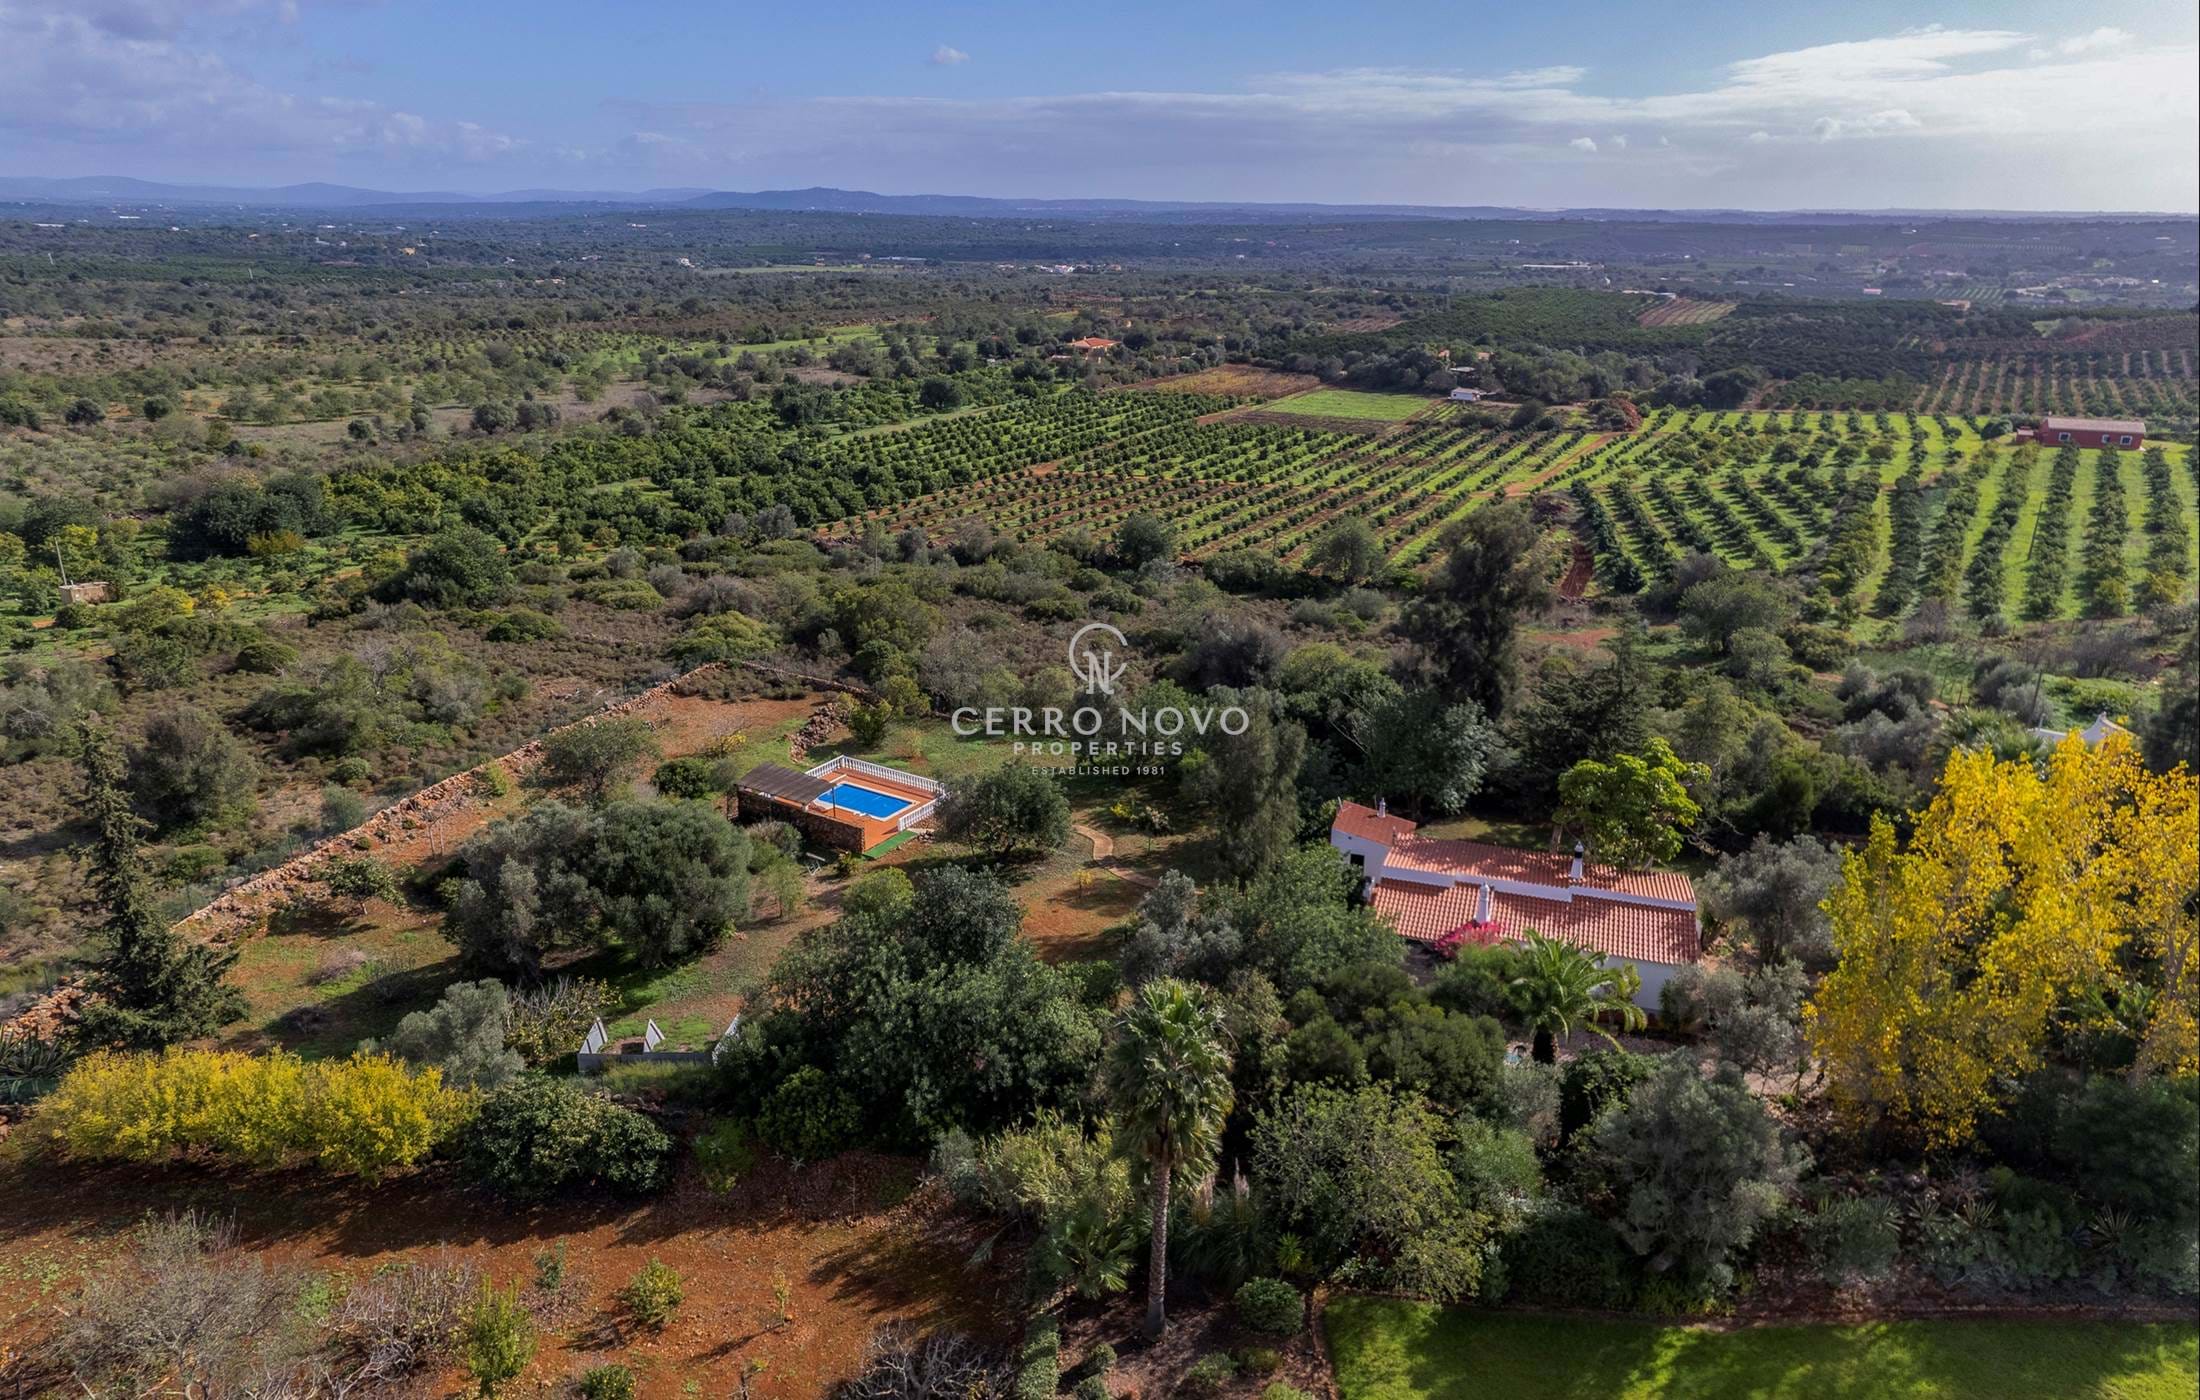 UNDER OFFER- A charming rural Algarve bungalow on a large plot with pool